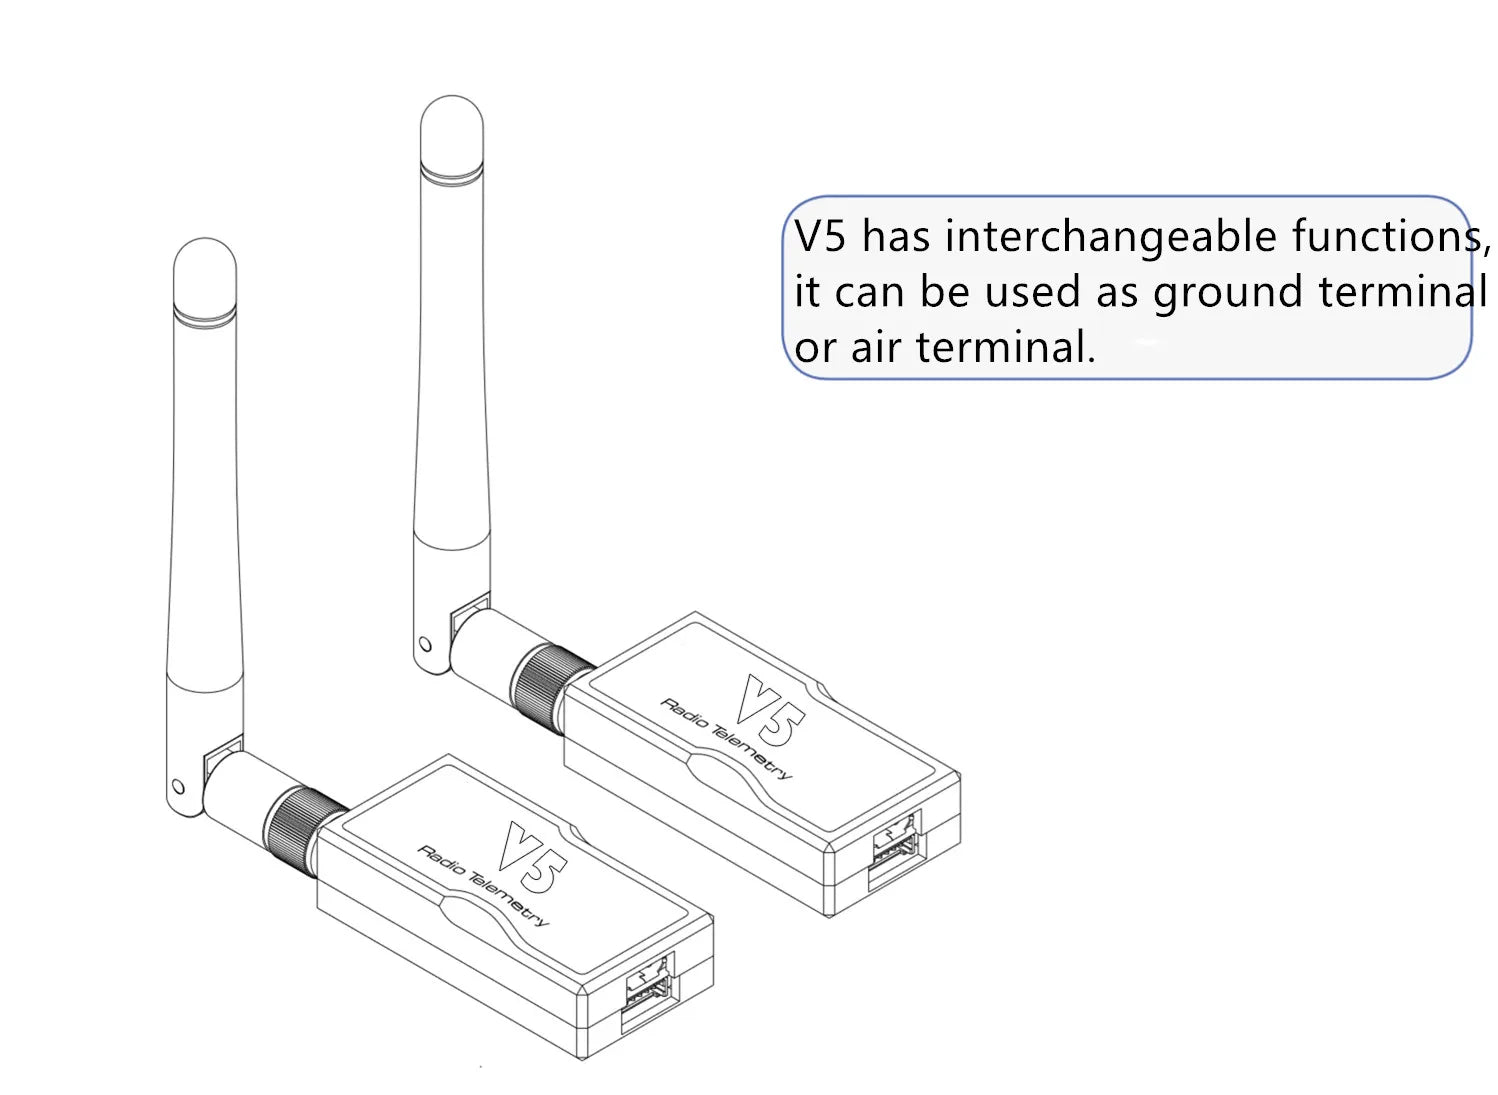 3DR Radio V5 Telemetry, V5 has interchangeable functions, it can be used as ground terminal or air terminal .